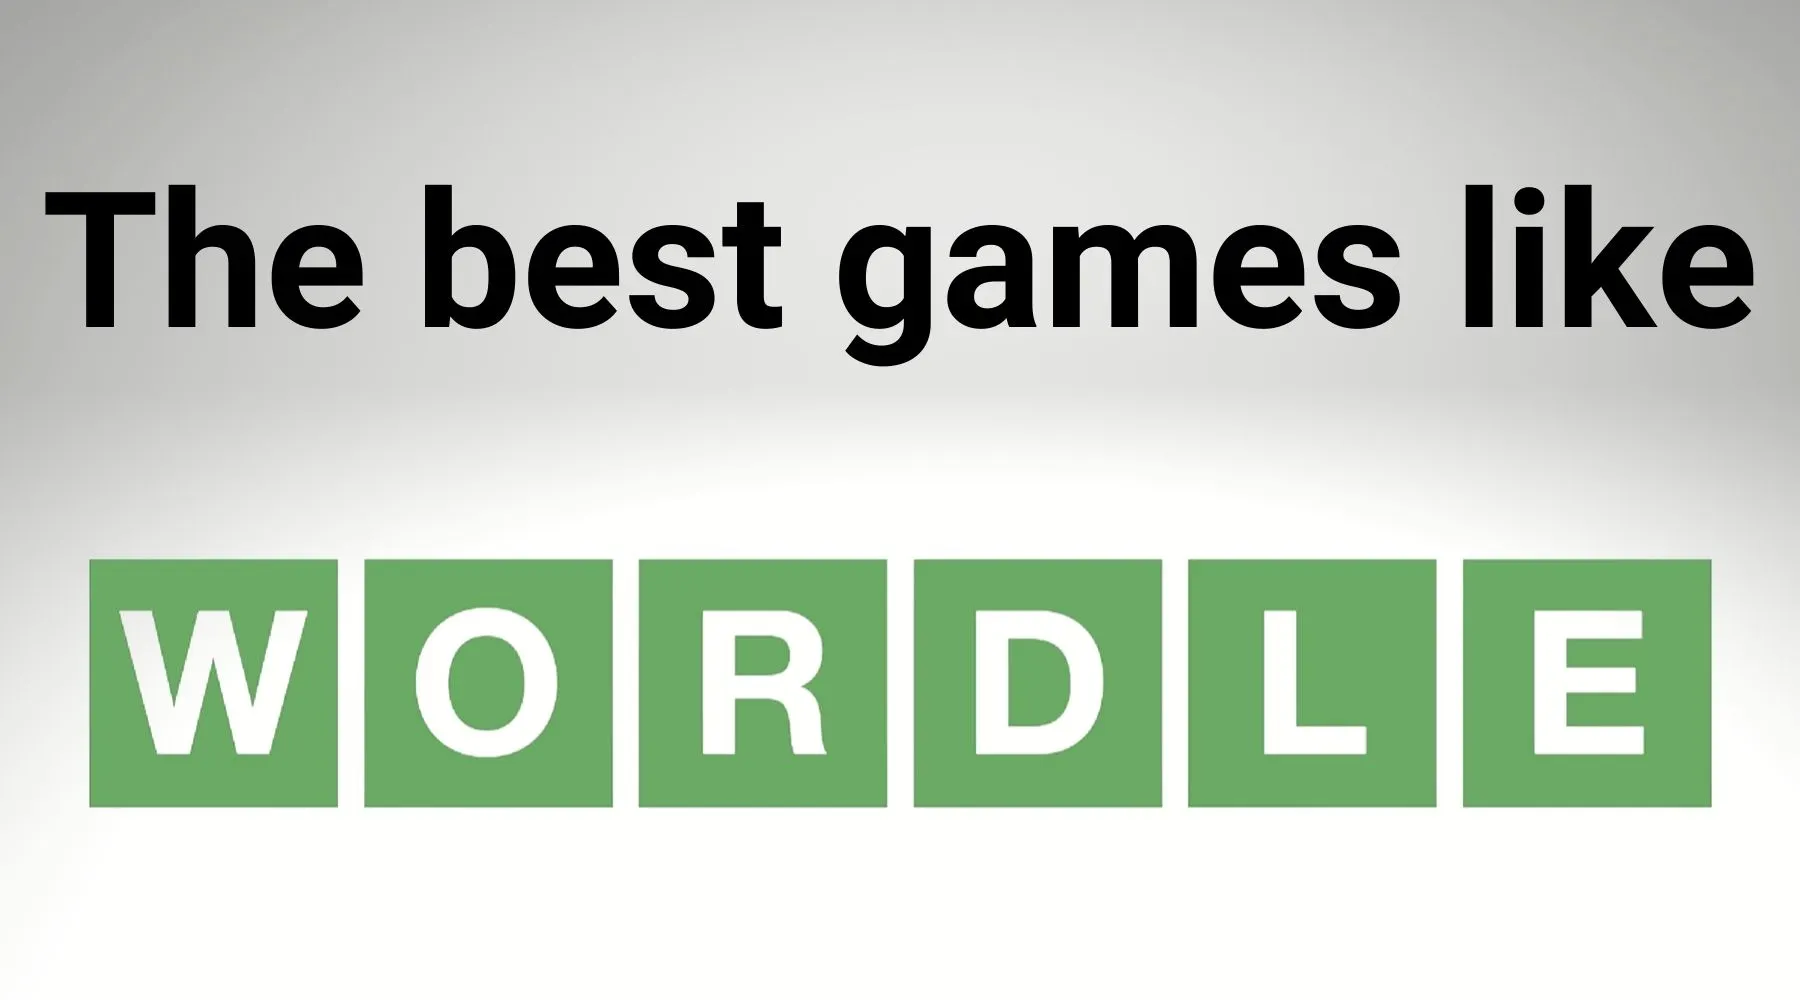 Games like Wordle – the best spinoffs and alternatives